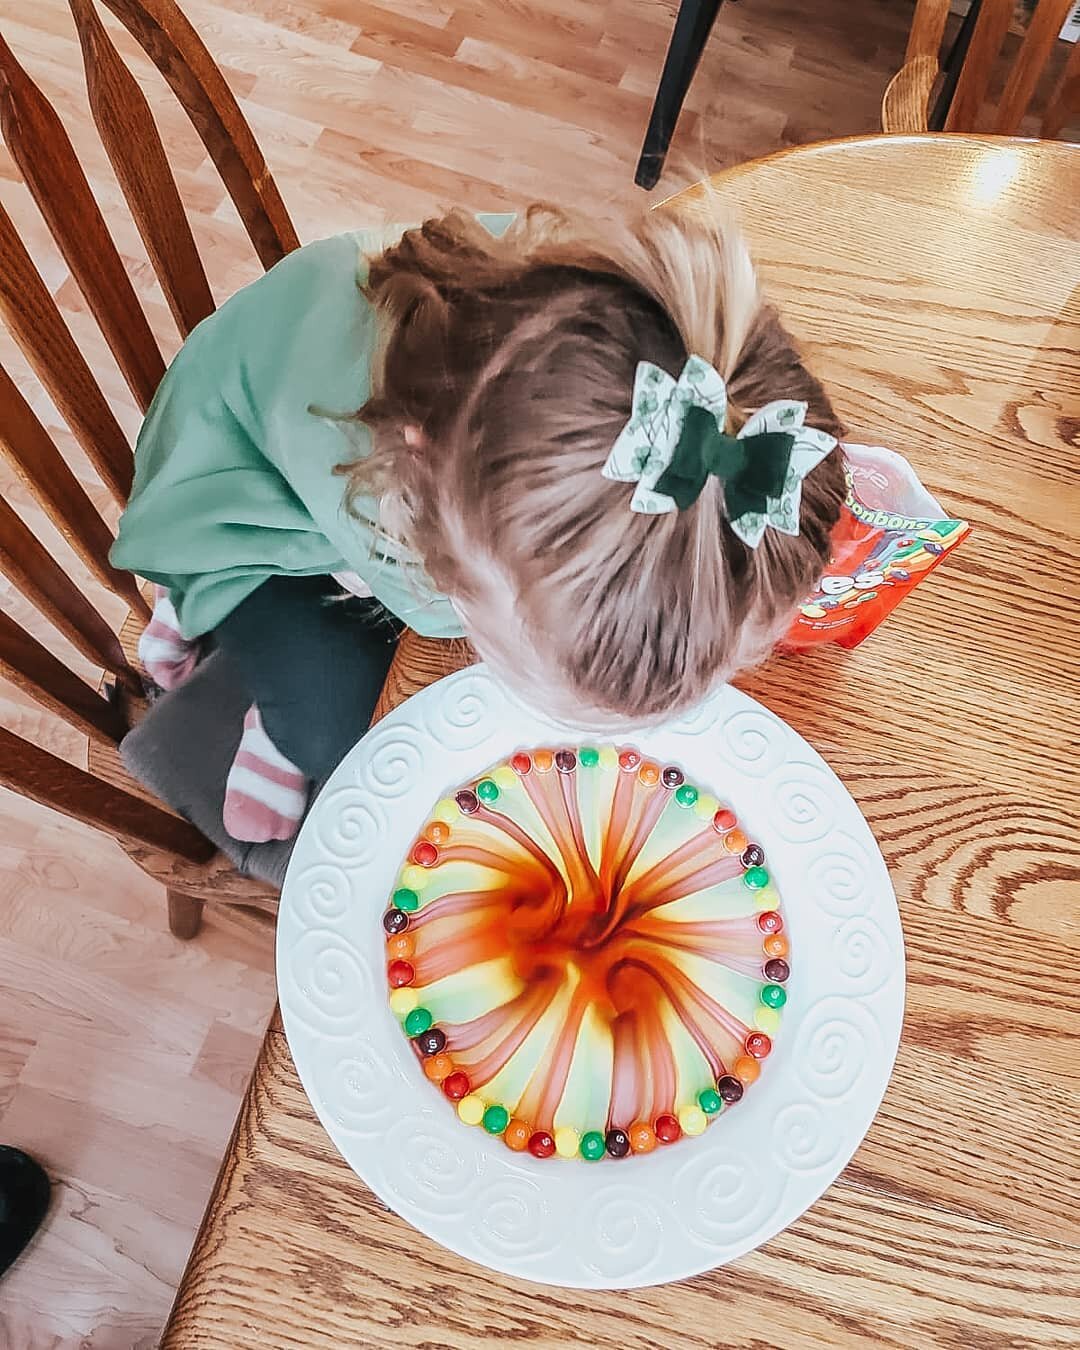 Fun little rainbow activity with Papa this morning to celebrate St. Patrick's Day! 🍀🌈